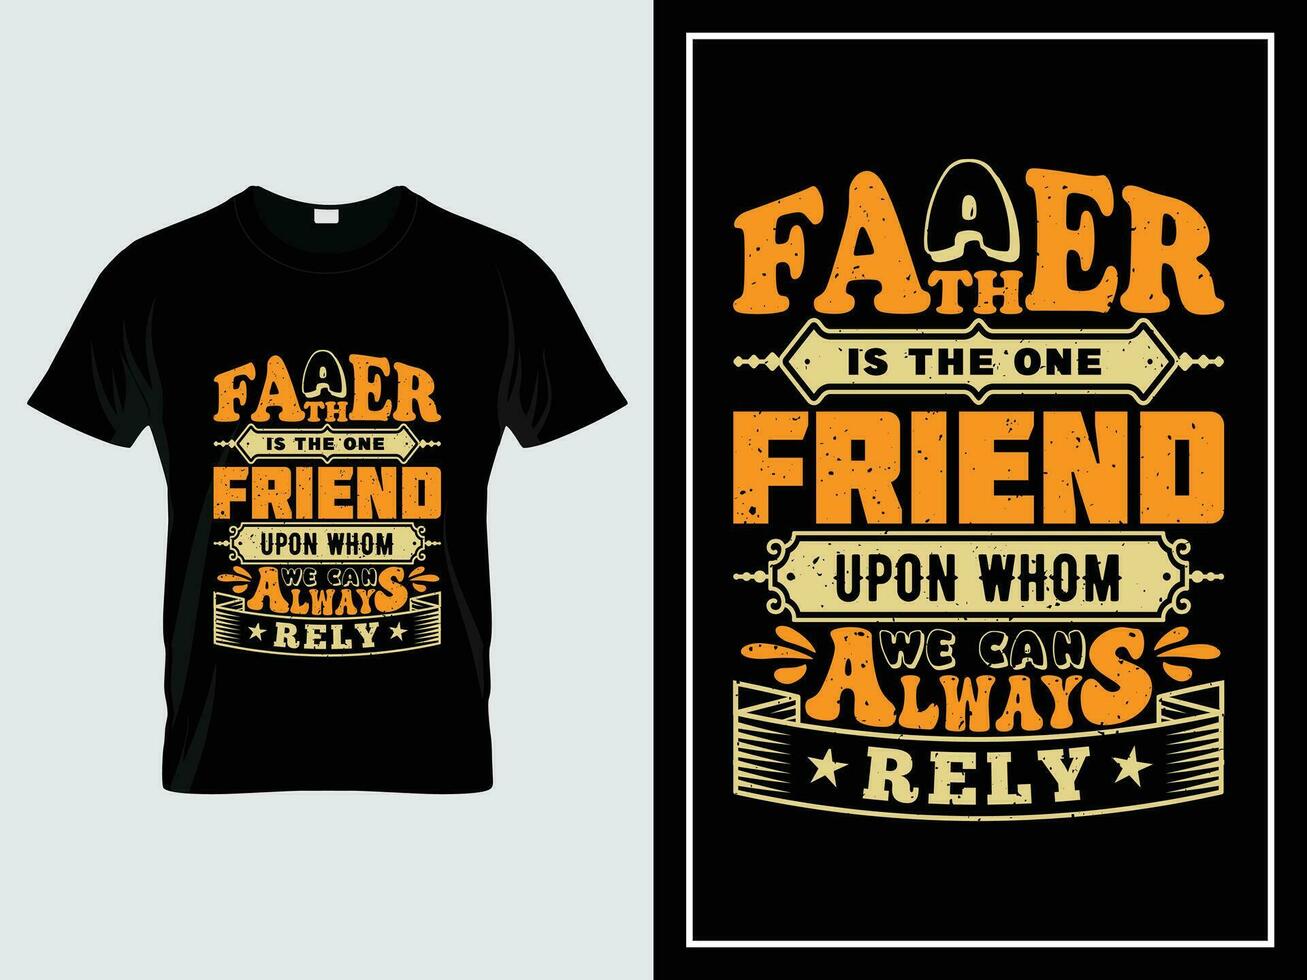 Dad typography t shirt design vintage, A father is the one friend upon whom we can always rely vector